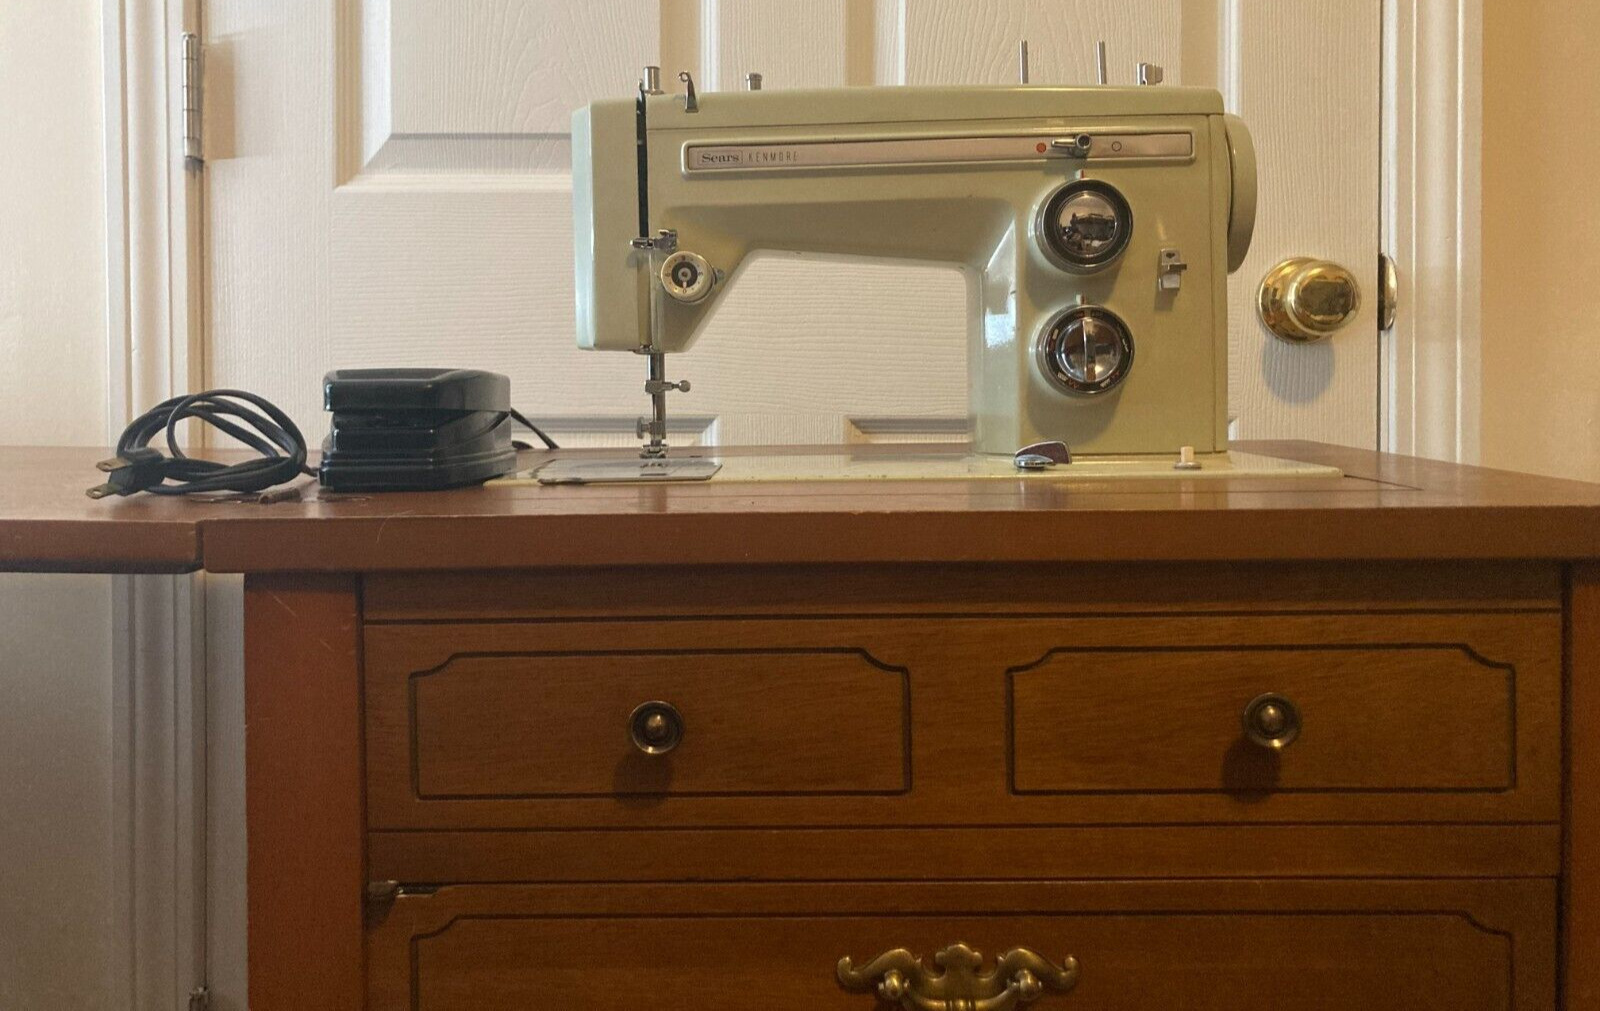 Vintage Sears Kenmore Sewing Machine Model 158.14001 with Pedal Serviced, Tested